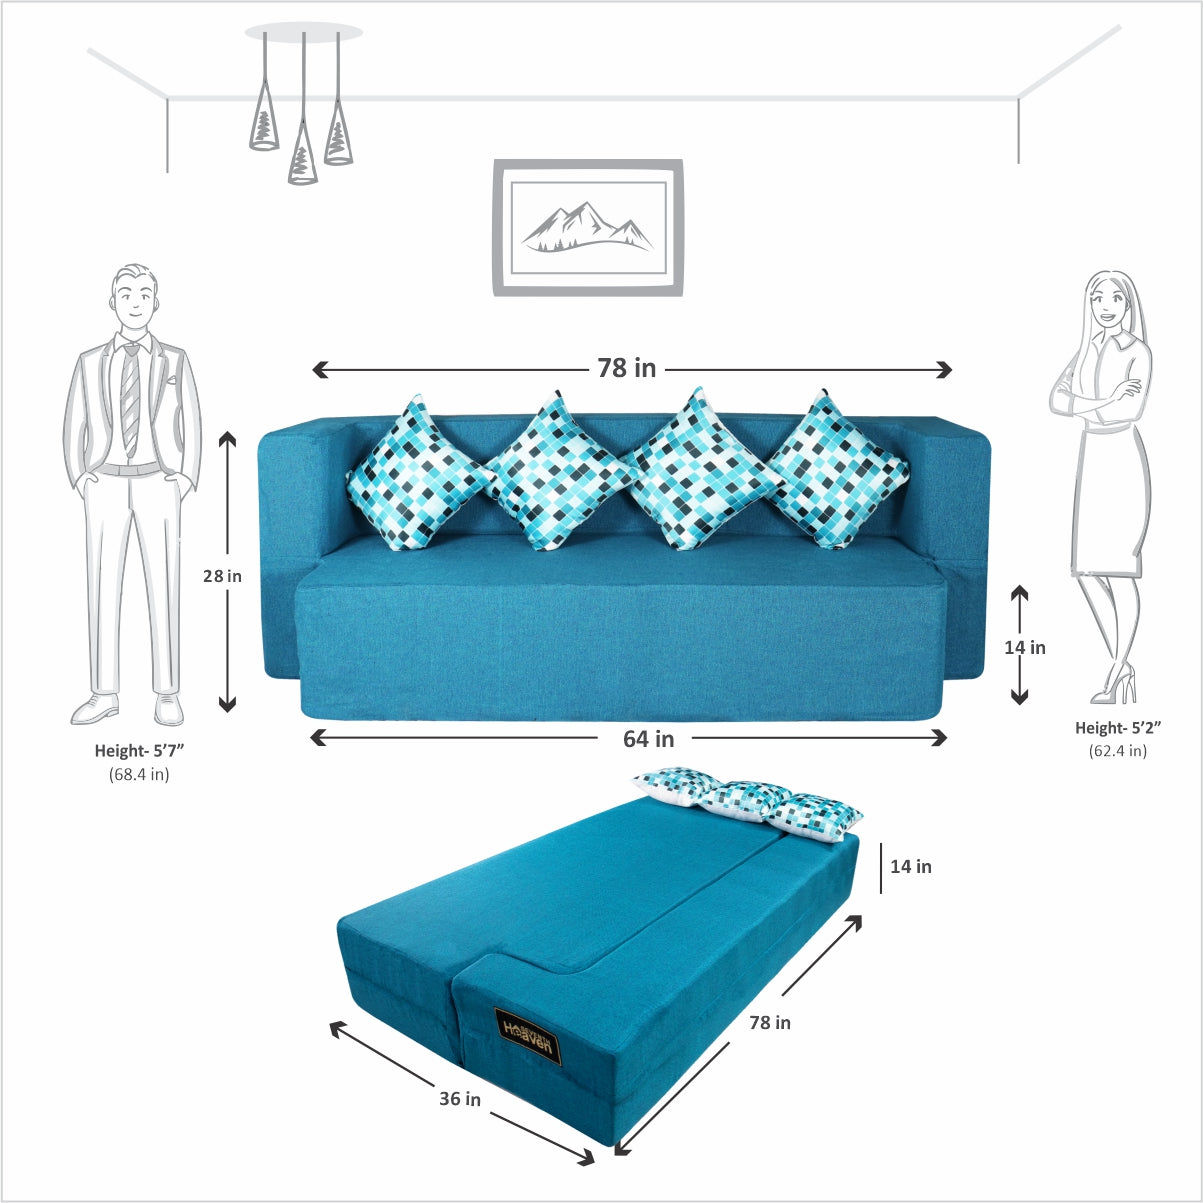 Cover of Blue Jute Fabric (78"x36"x14") FlipperX Sofa cum Bed with 4 Printed Cushion Covers